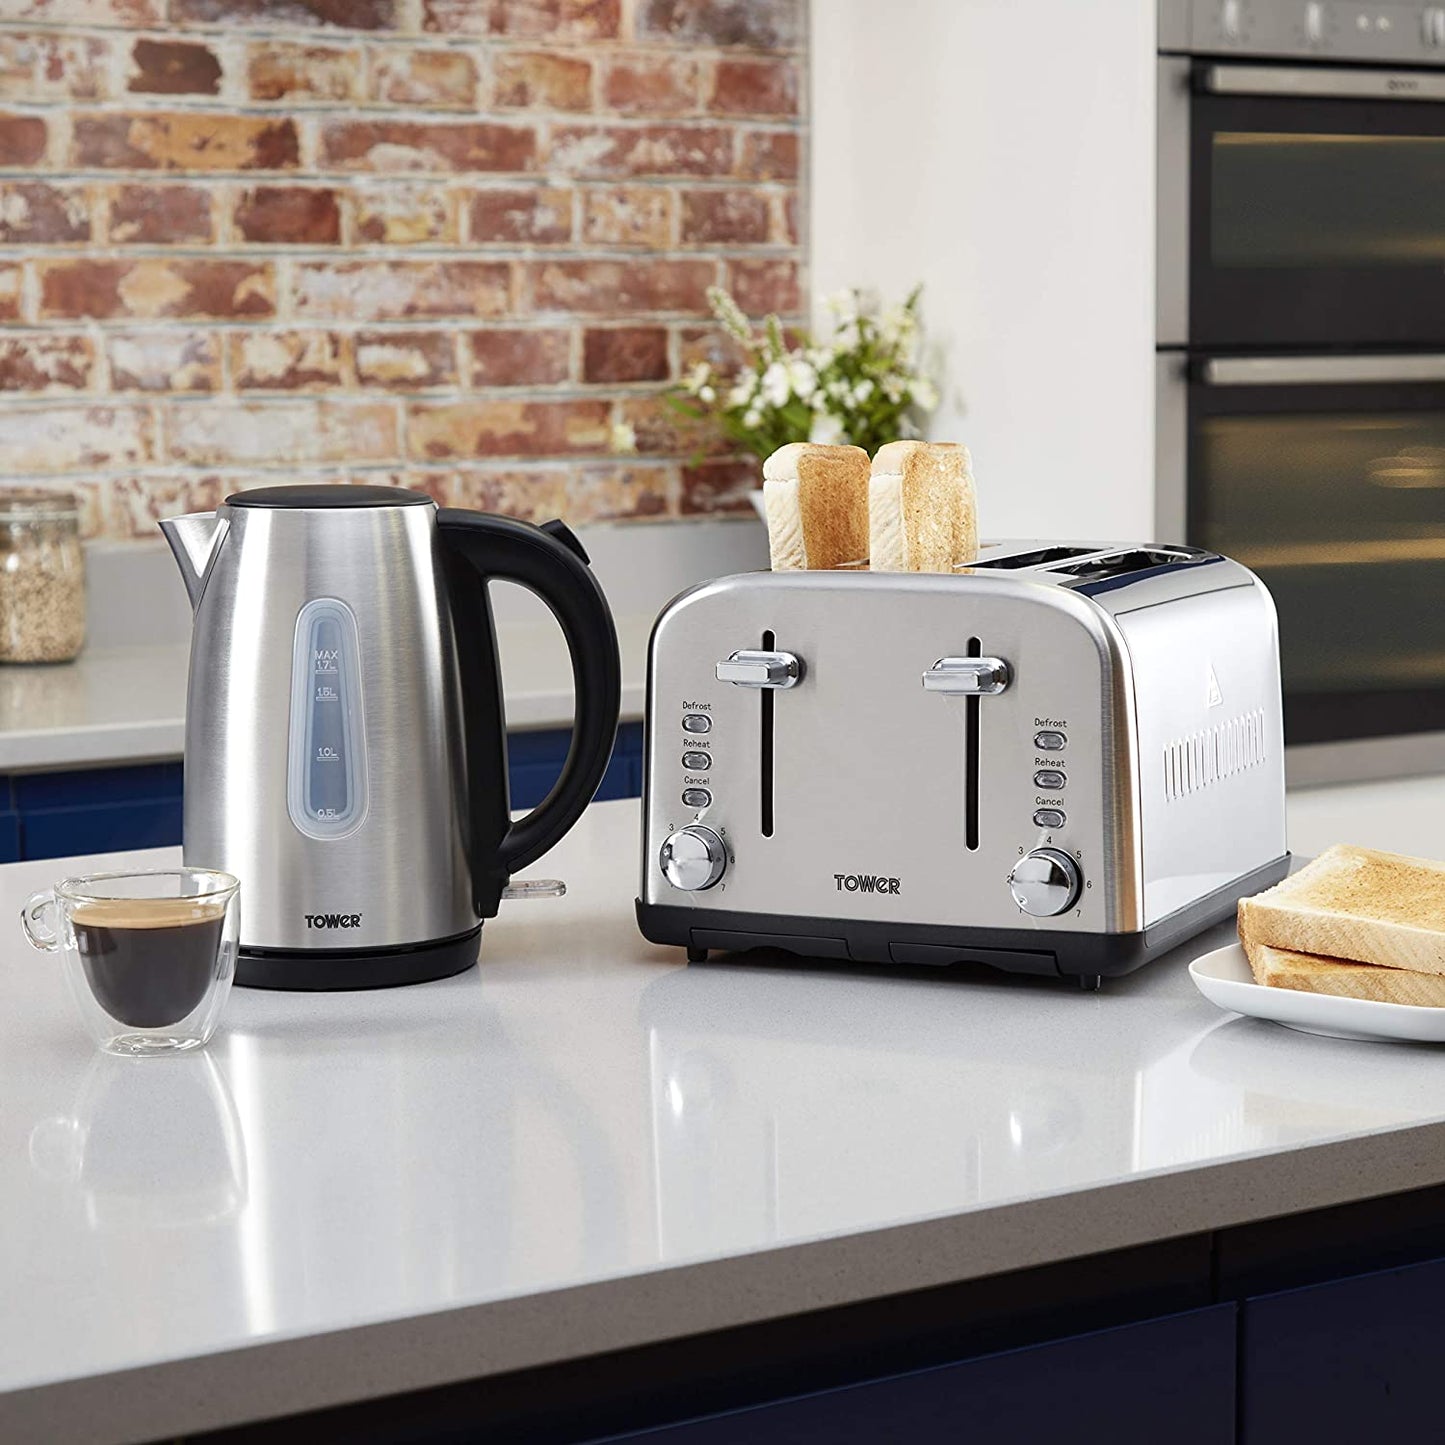 Tower Electric Stainless Steel 4 Slice Toaster Infinity 1800W (T20015S)